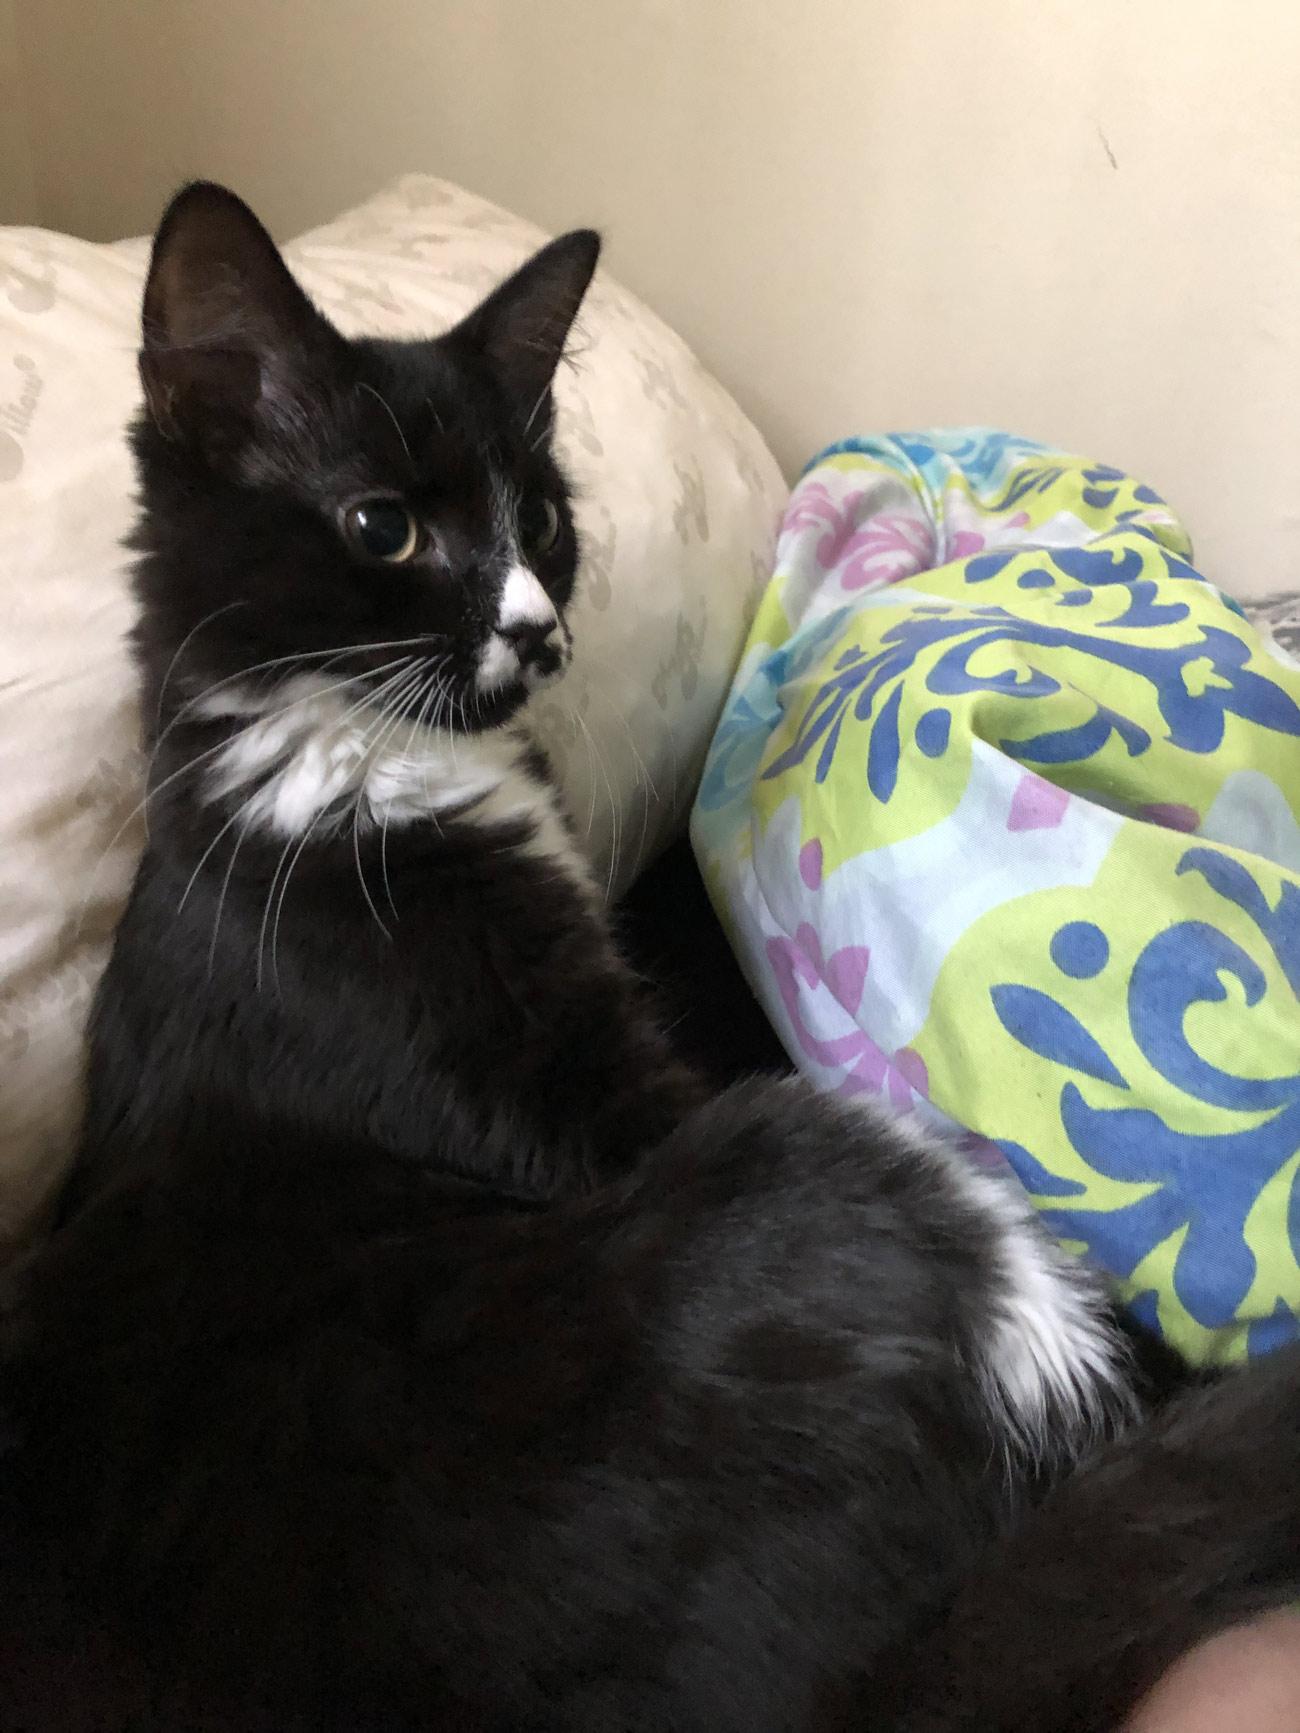 Gracie M., from Levittown, NY sent in her photo of her newly adopted female cat named Logan. Logan is a Tuxedo cat, so she's always ready for a formal affair. She also loves to play fetch.